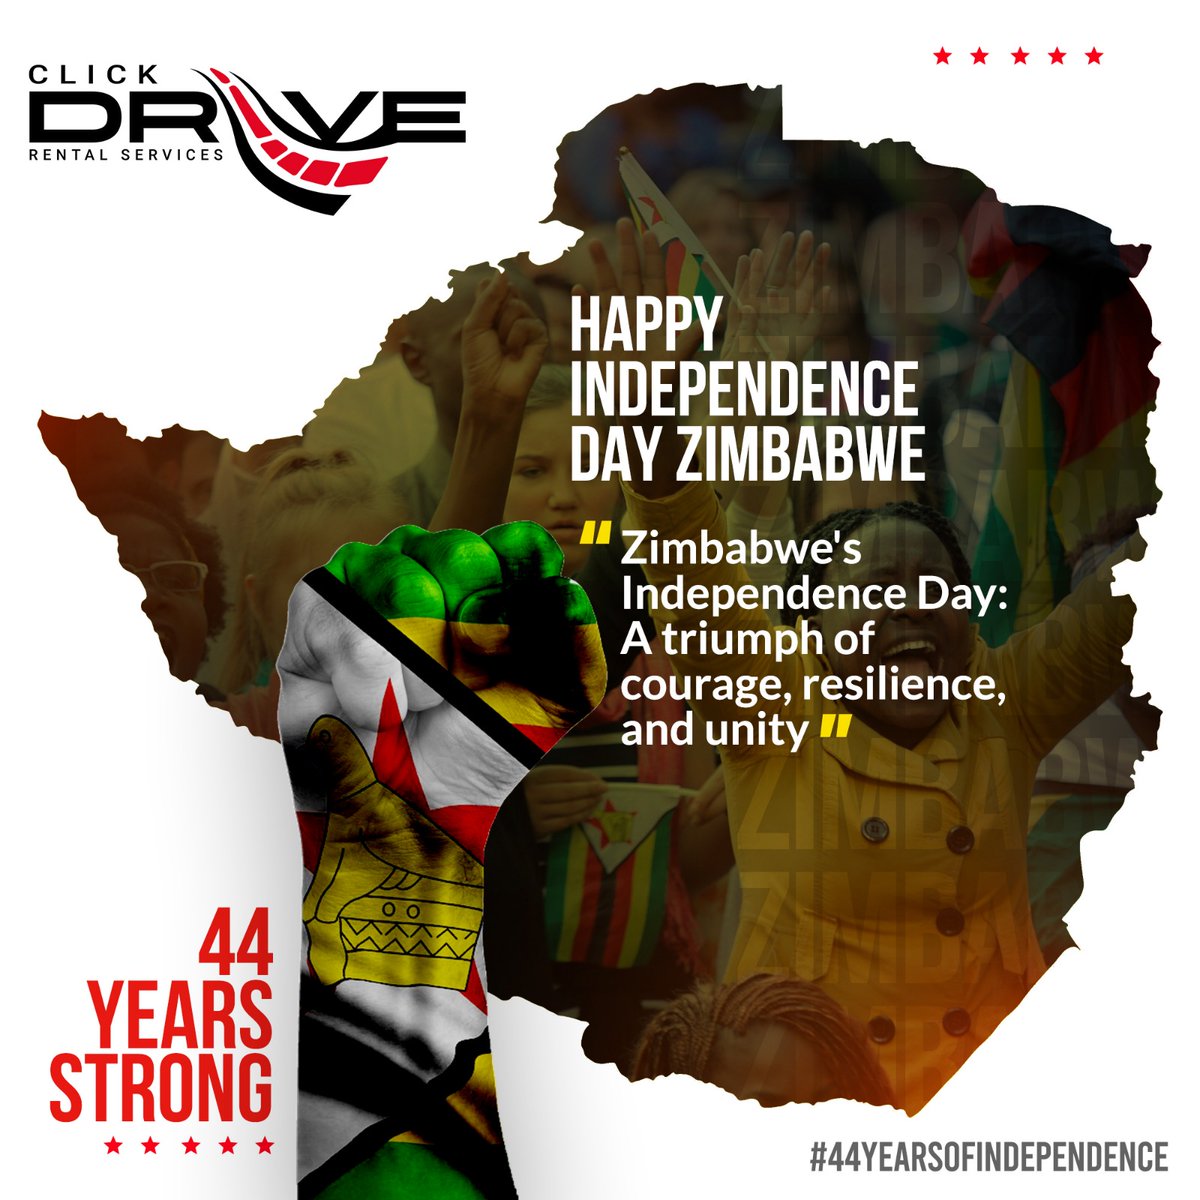 Happy Independence day Zimbabwe !.Celebrate this Independence Day with safe cars from Clickdrive Car Rental Services #Clickdrive #carhire #Freedomofchoice #holidaymakers